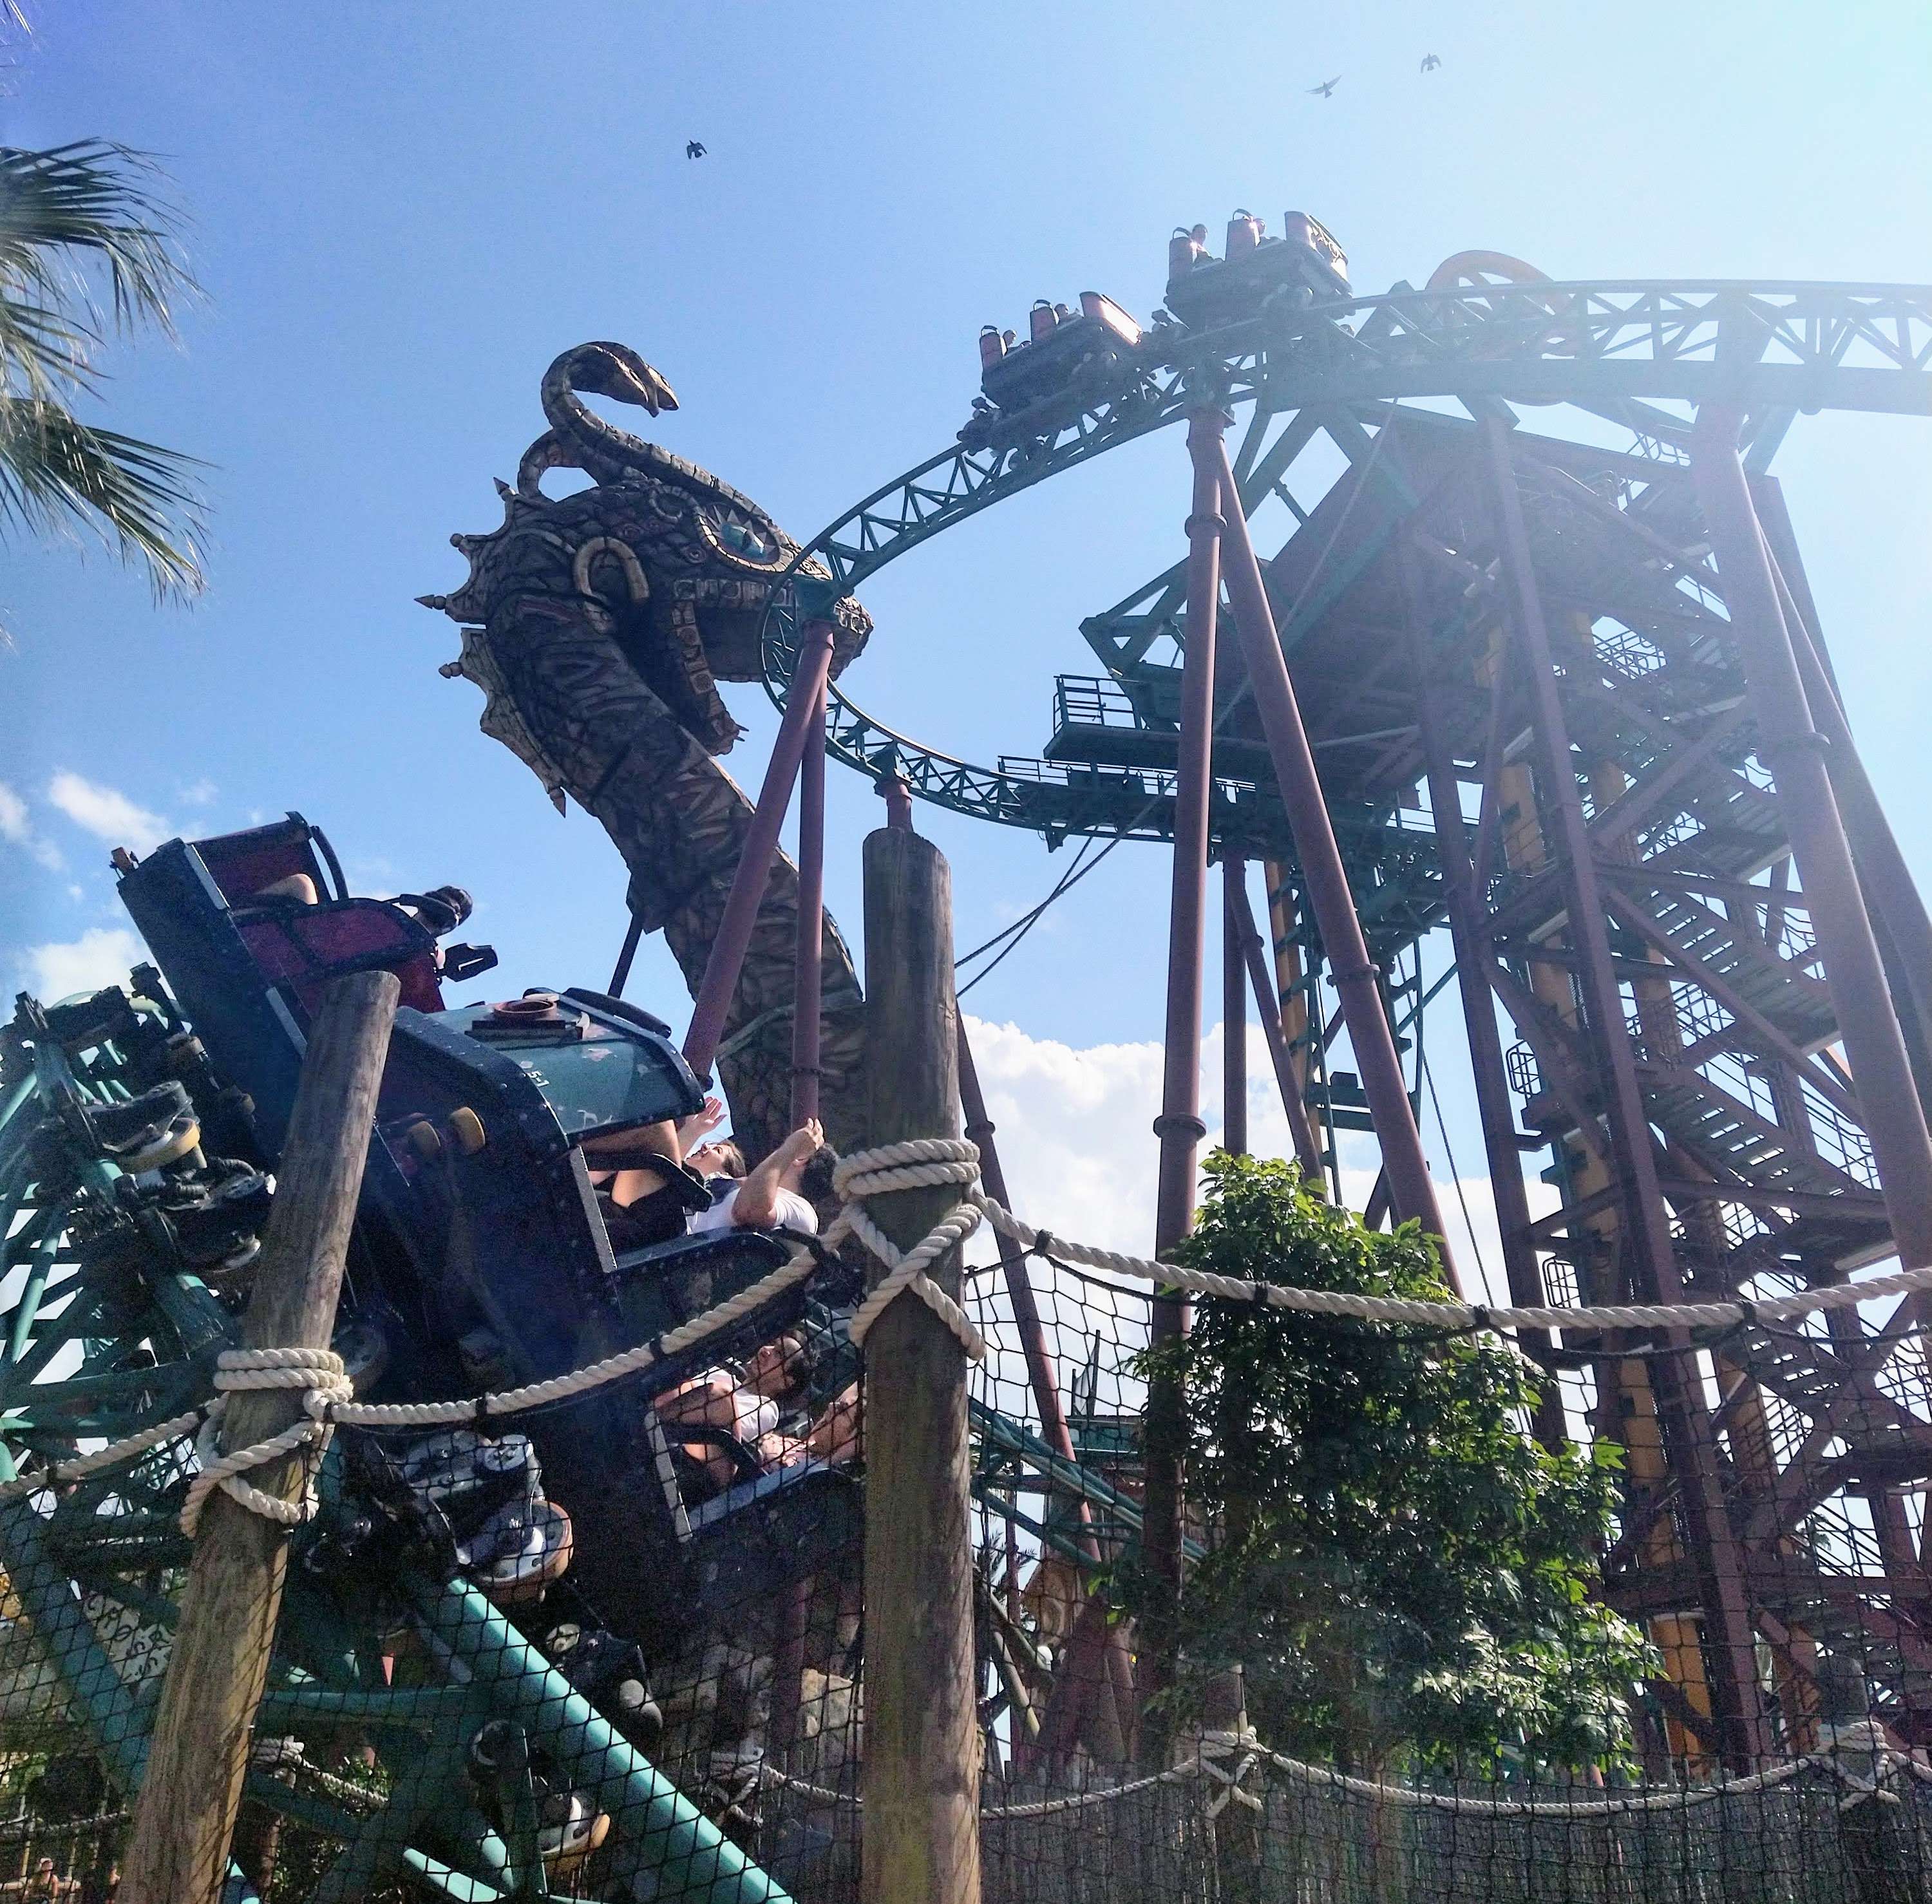 Cobra's Curse one train is coming down the first hill and another is coming around a corner right next to the camera